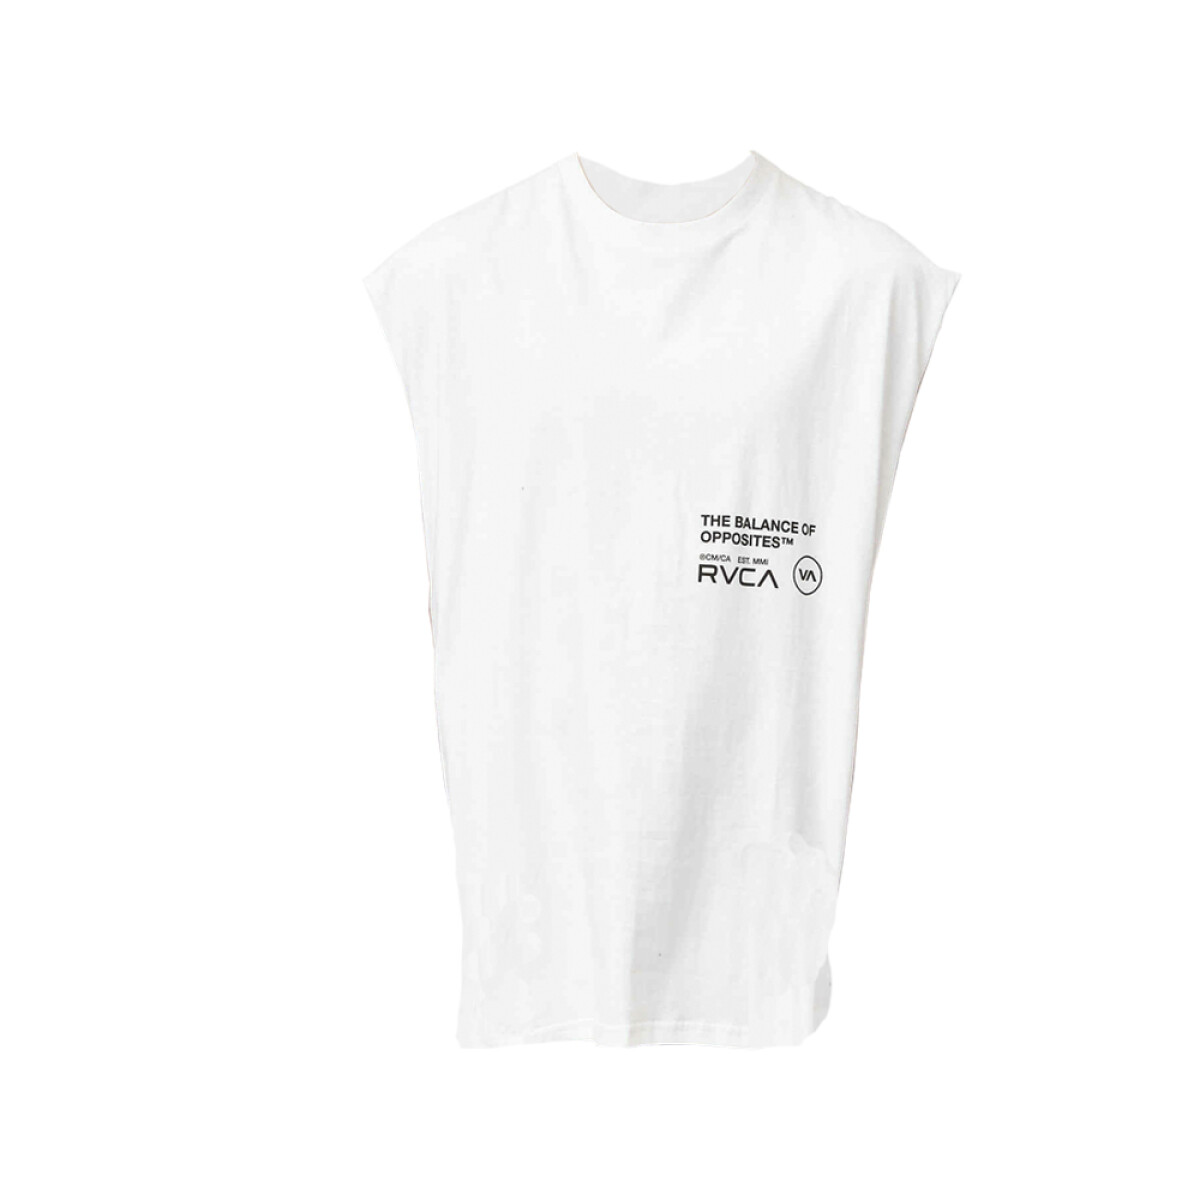 MUSCULOSA TEXTER OVER MUSCLE - White 